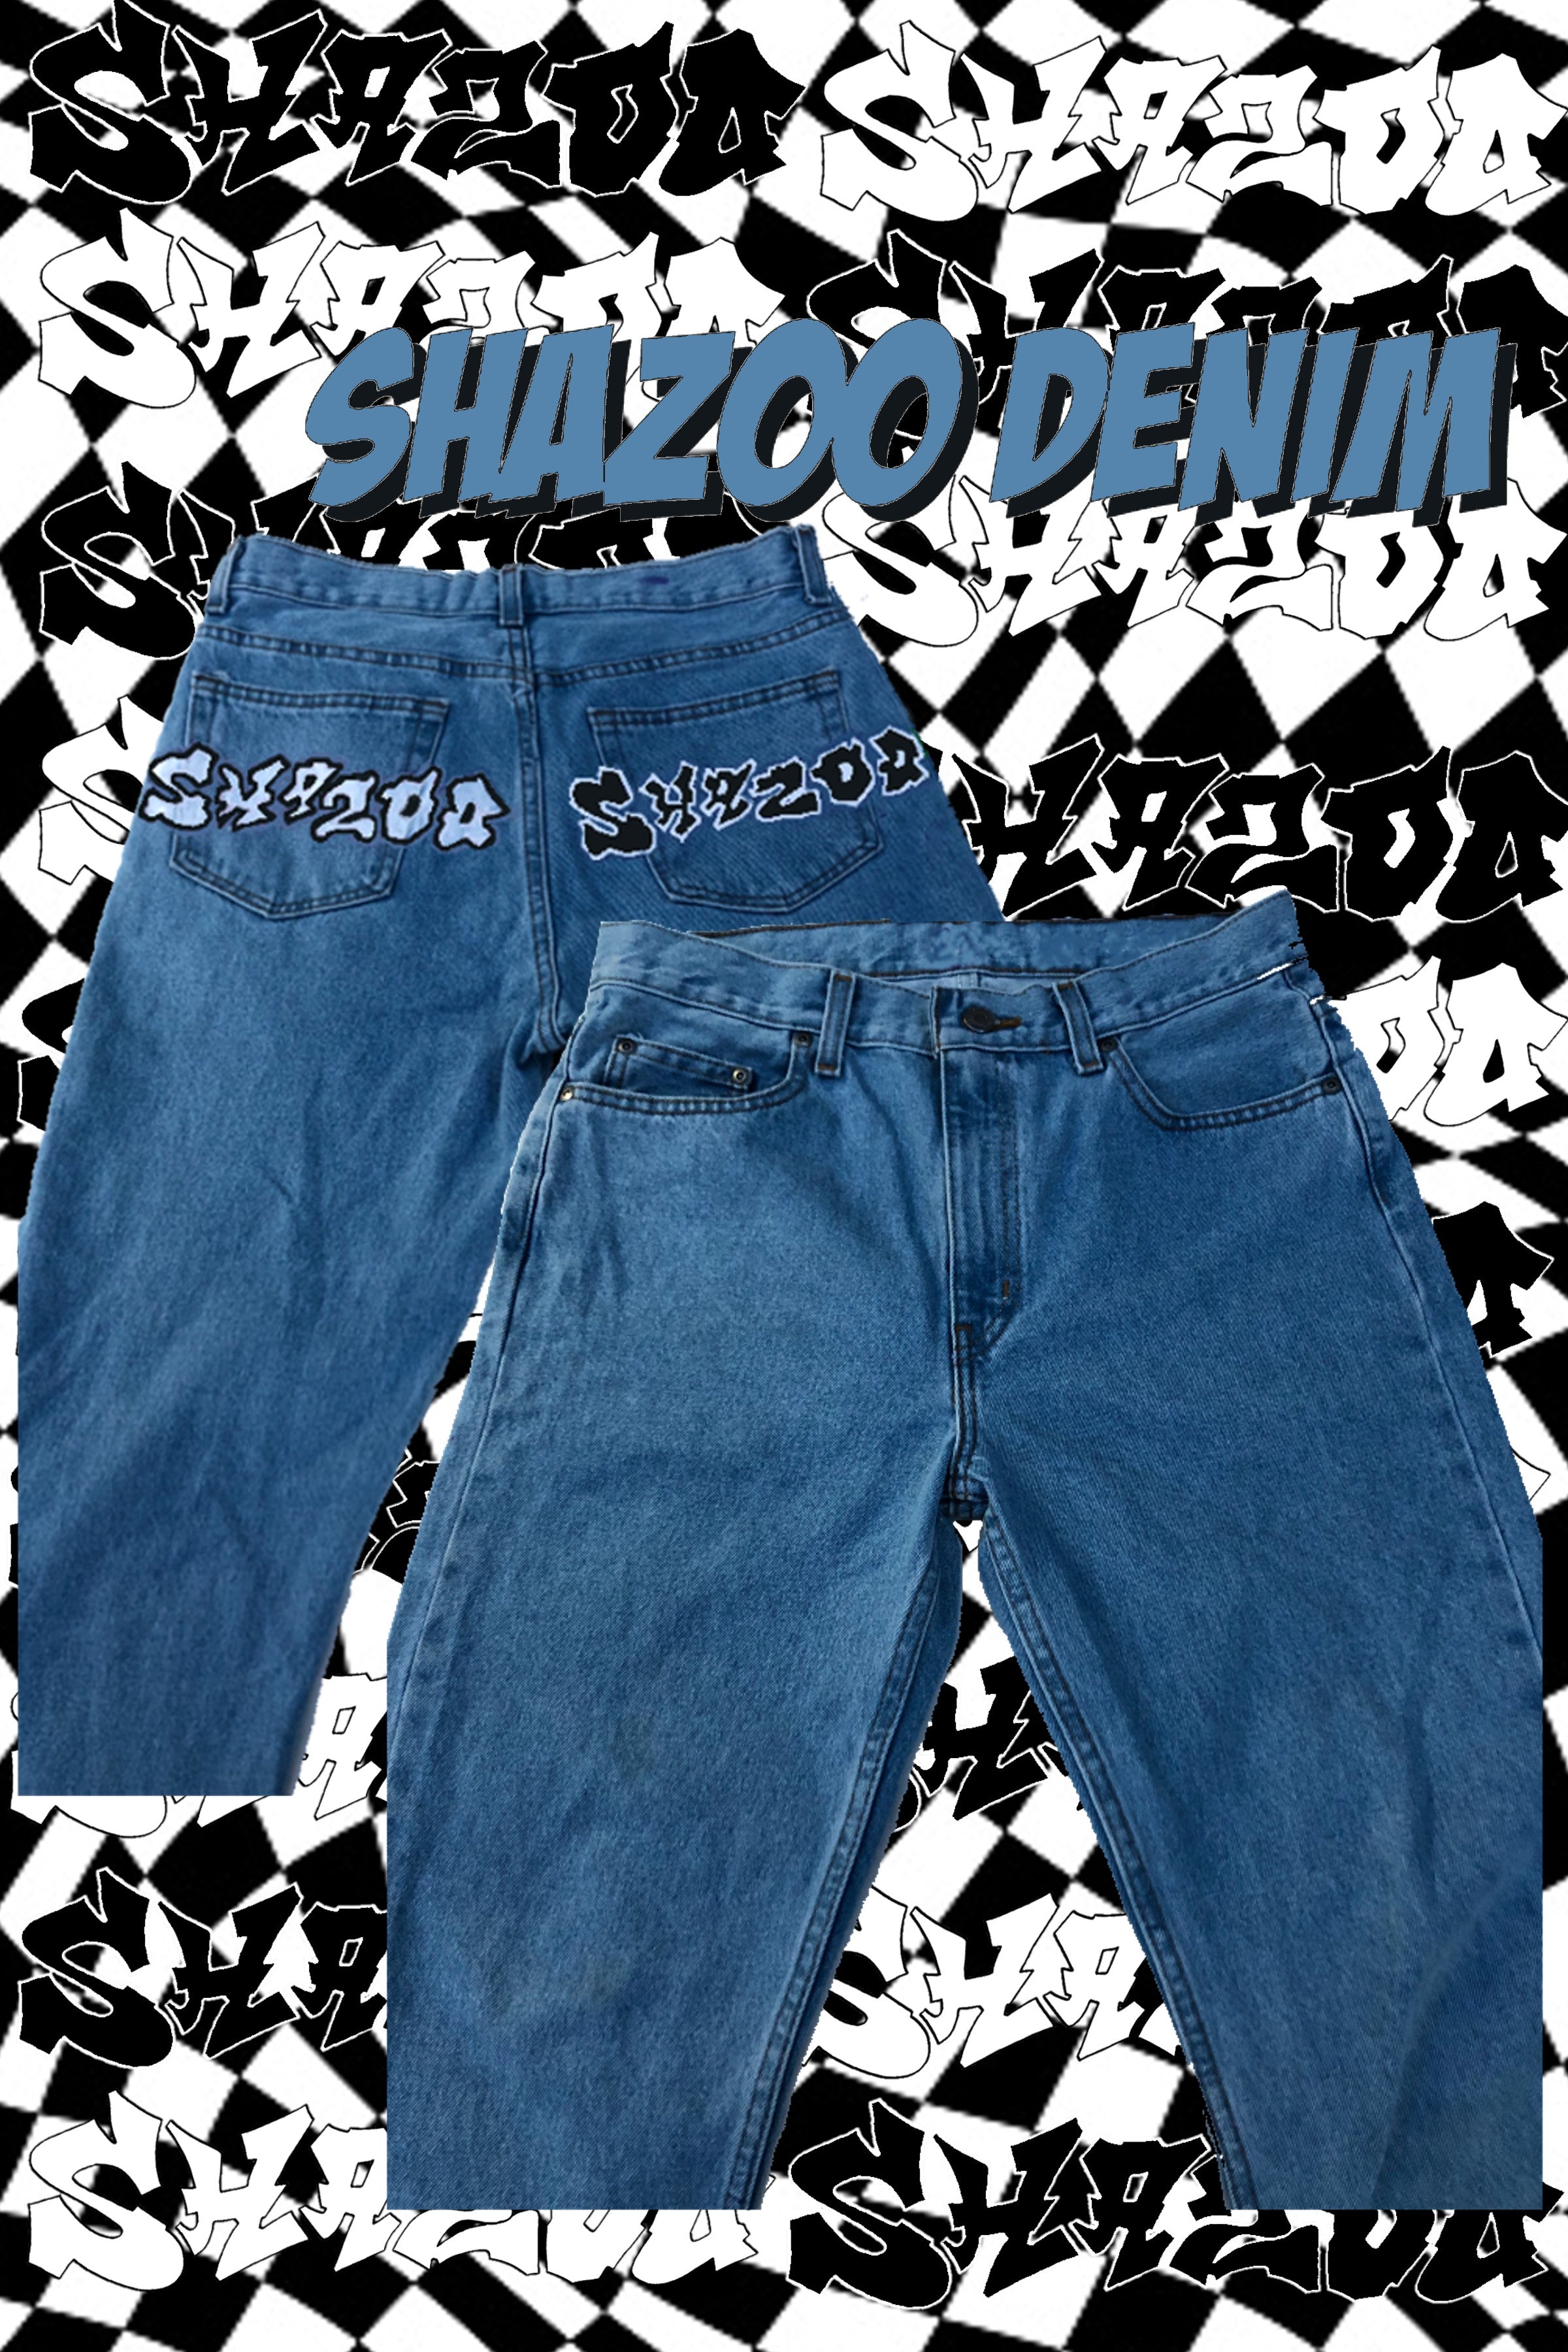 Hand painted regular fit SHAZOO denim jeans white and black SIZE UP 2-3  TIMES FOR BAGGY LOOK